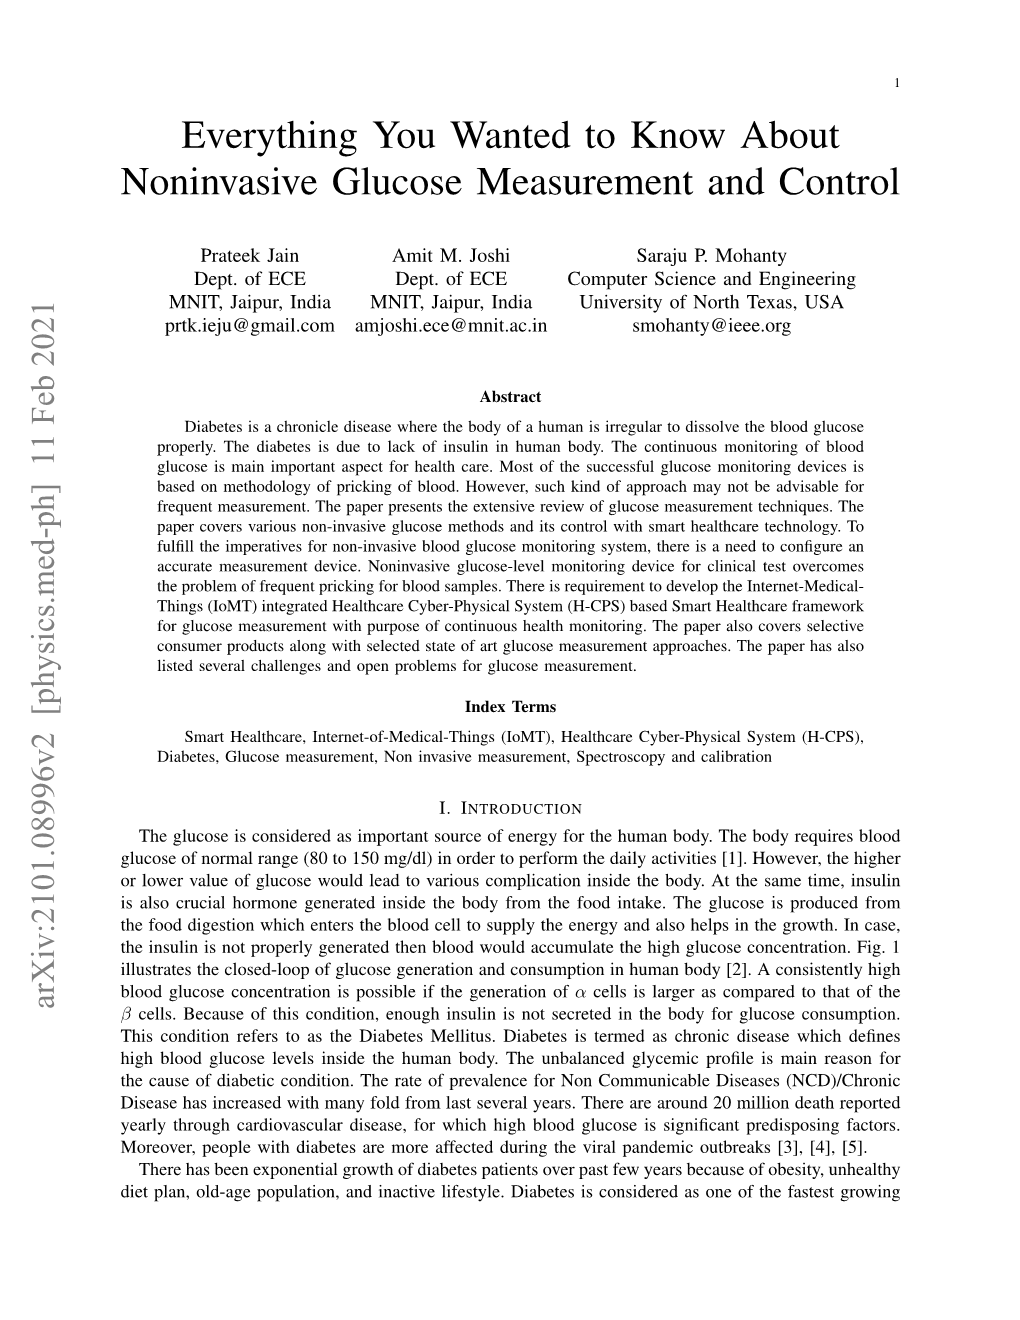 Everything You Wanted to Know About Noninvasive Glucose Measurement and Control